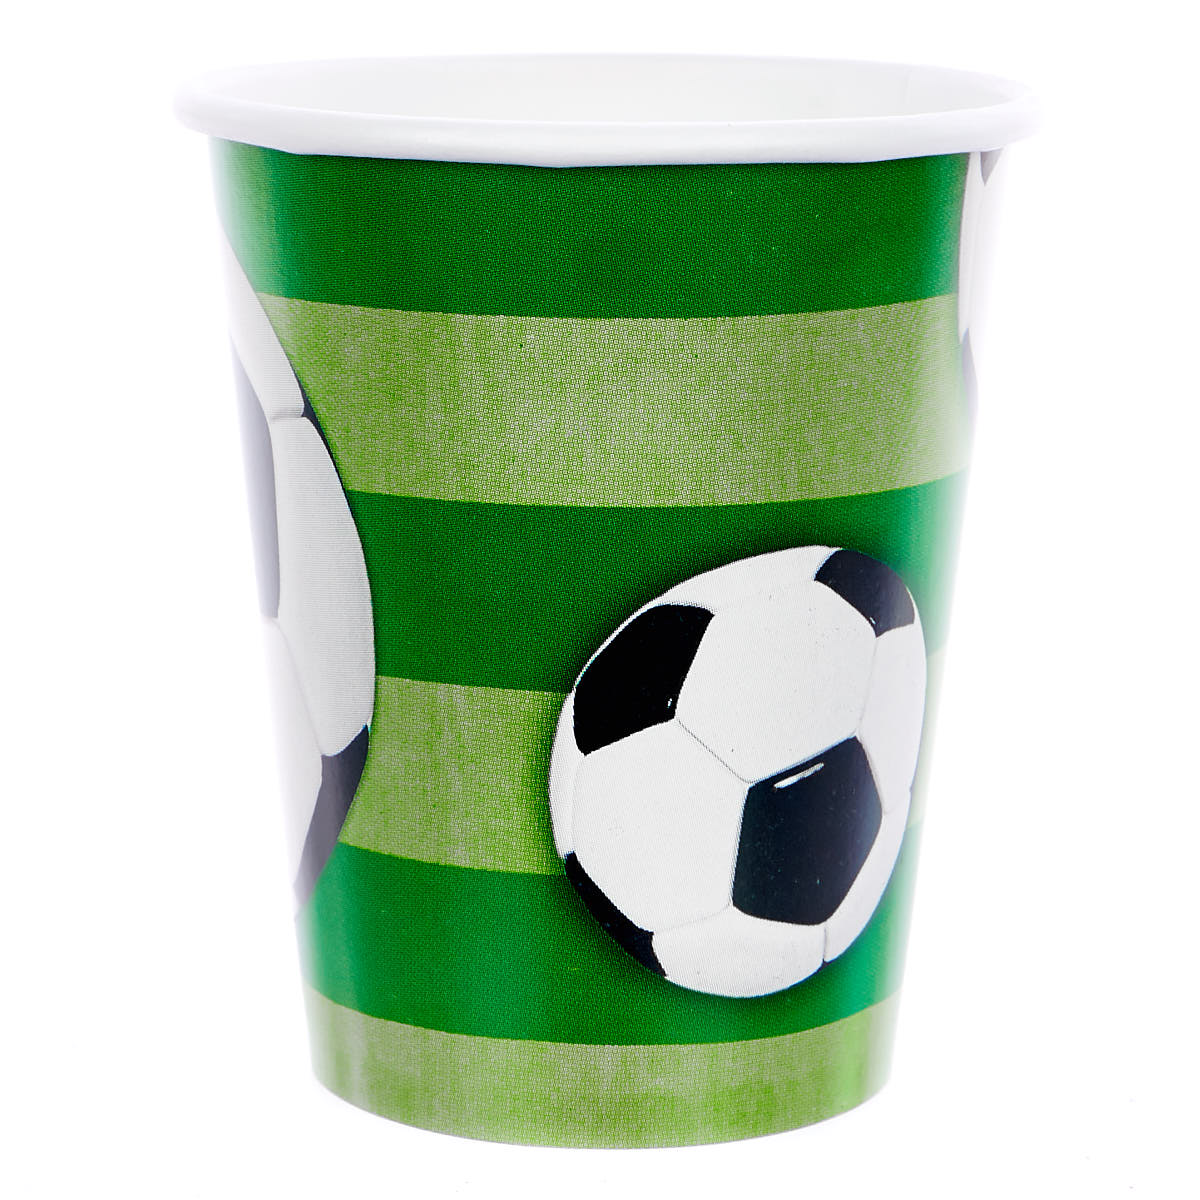 Football Birthday Party Tableware & Decoration Bundle - 16 Guests